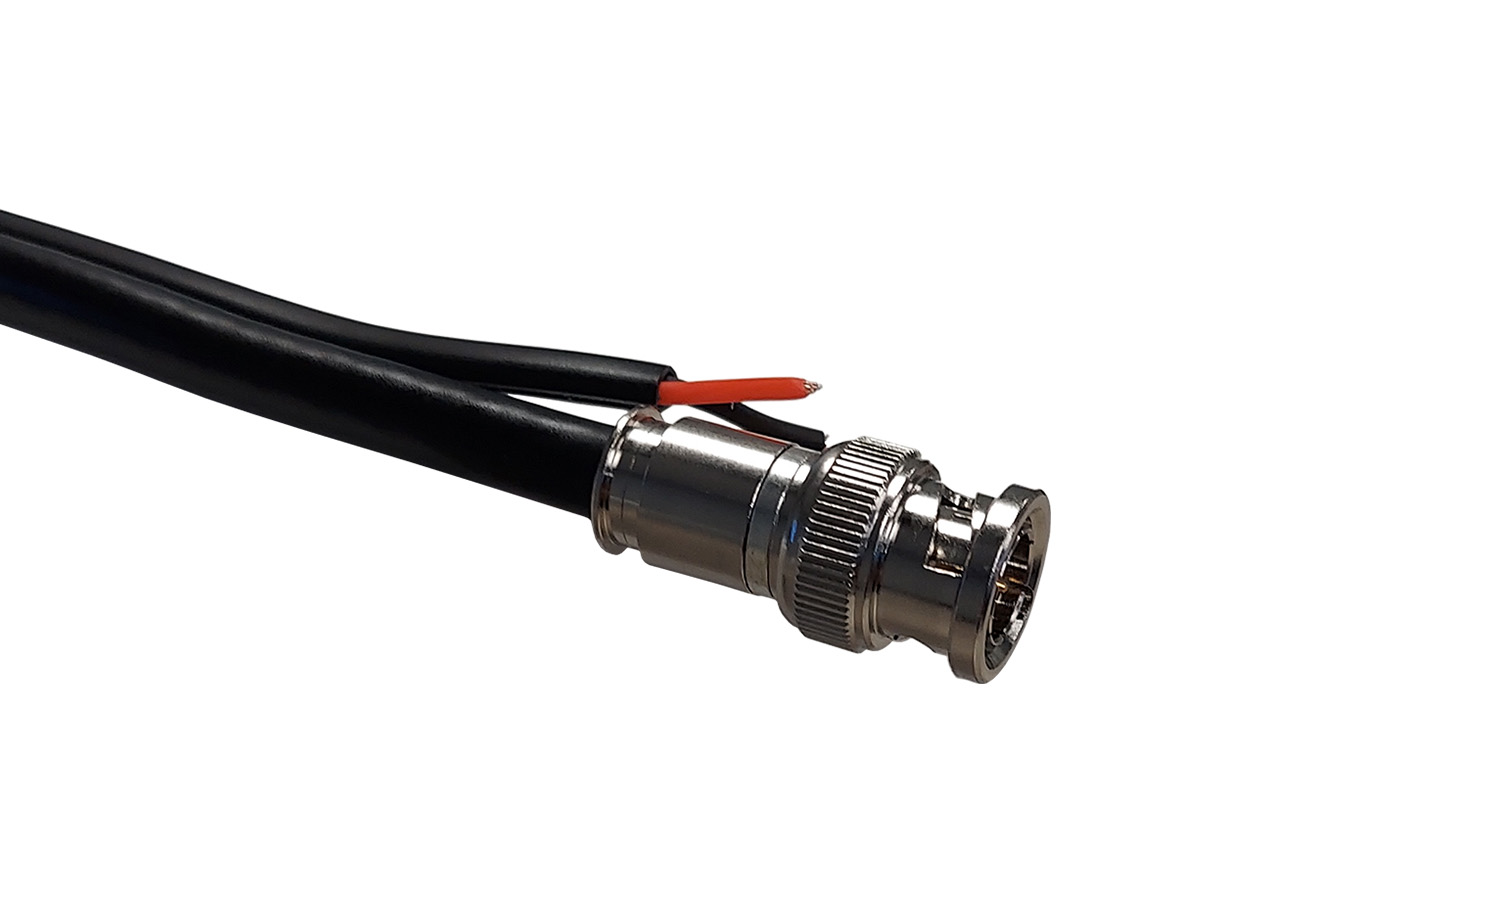 BG-CAB-SDIS100 1080P FHD 100ft 75-ohm Premade Shielded SDI with DC Siamese Cable by BZBGEAR